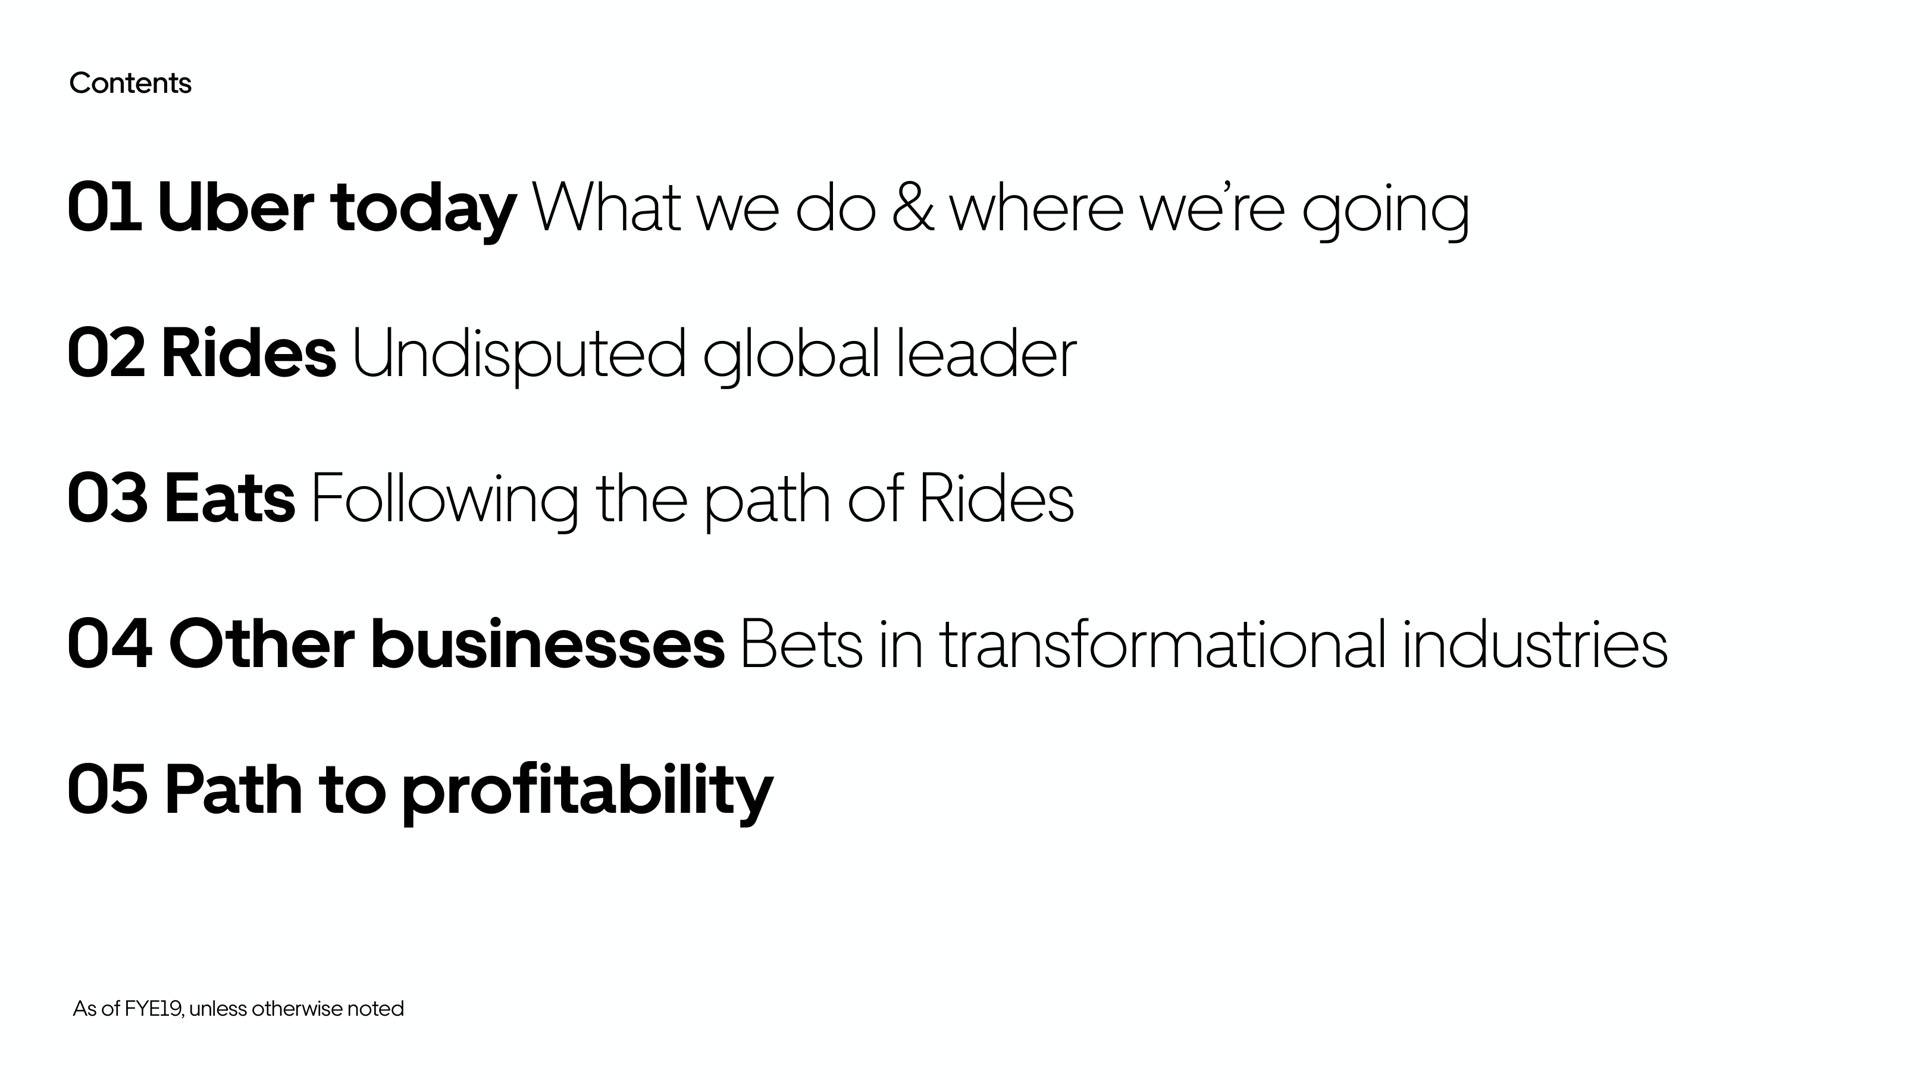 today what we do where we going rides undisputed global leader eats following the path of rides other businesses bets in industries path to profitability were | Uber